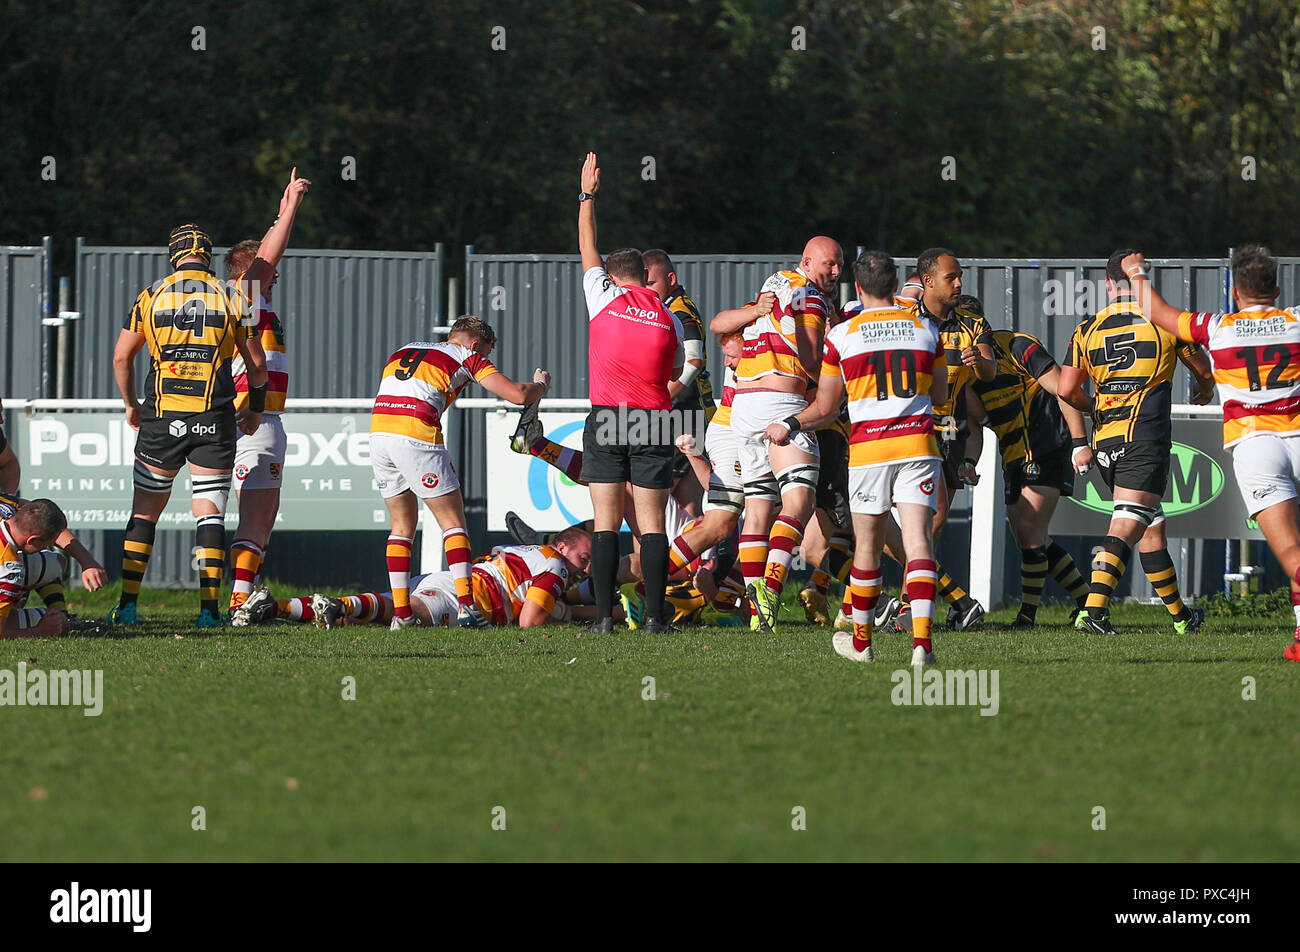 20.10.2018 Hinckley, Leicester, England. Rugby Union, Hinckley rfc v Fylde rfc.  Elliot Horner scores a try for Fylde during the RFU National League 2 North (NL2N) game played at the Leicester  Road Stadium.    © Phil Hutchinson / Alamy Live News Stock Photo